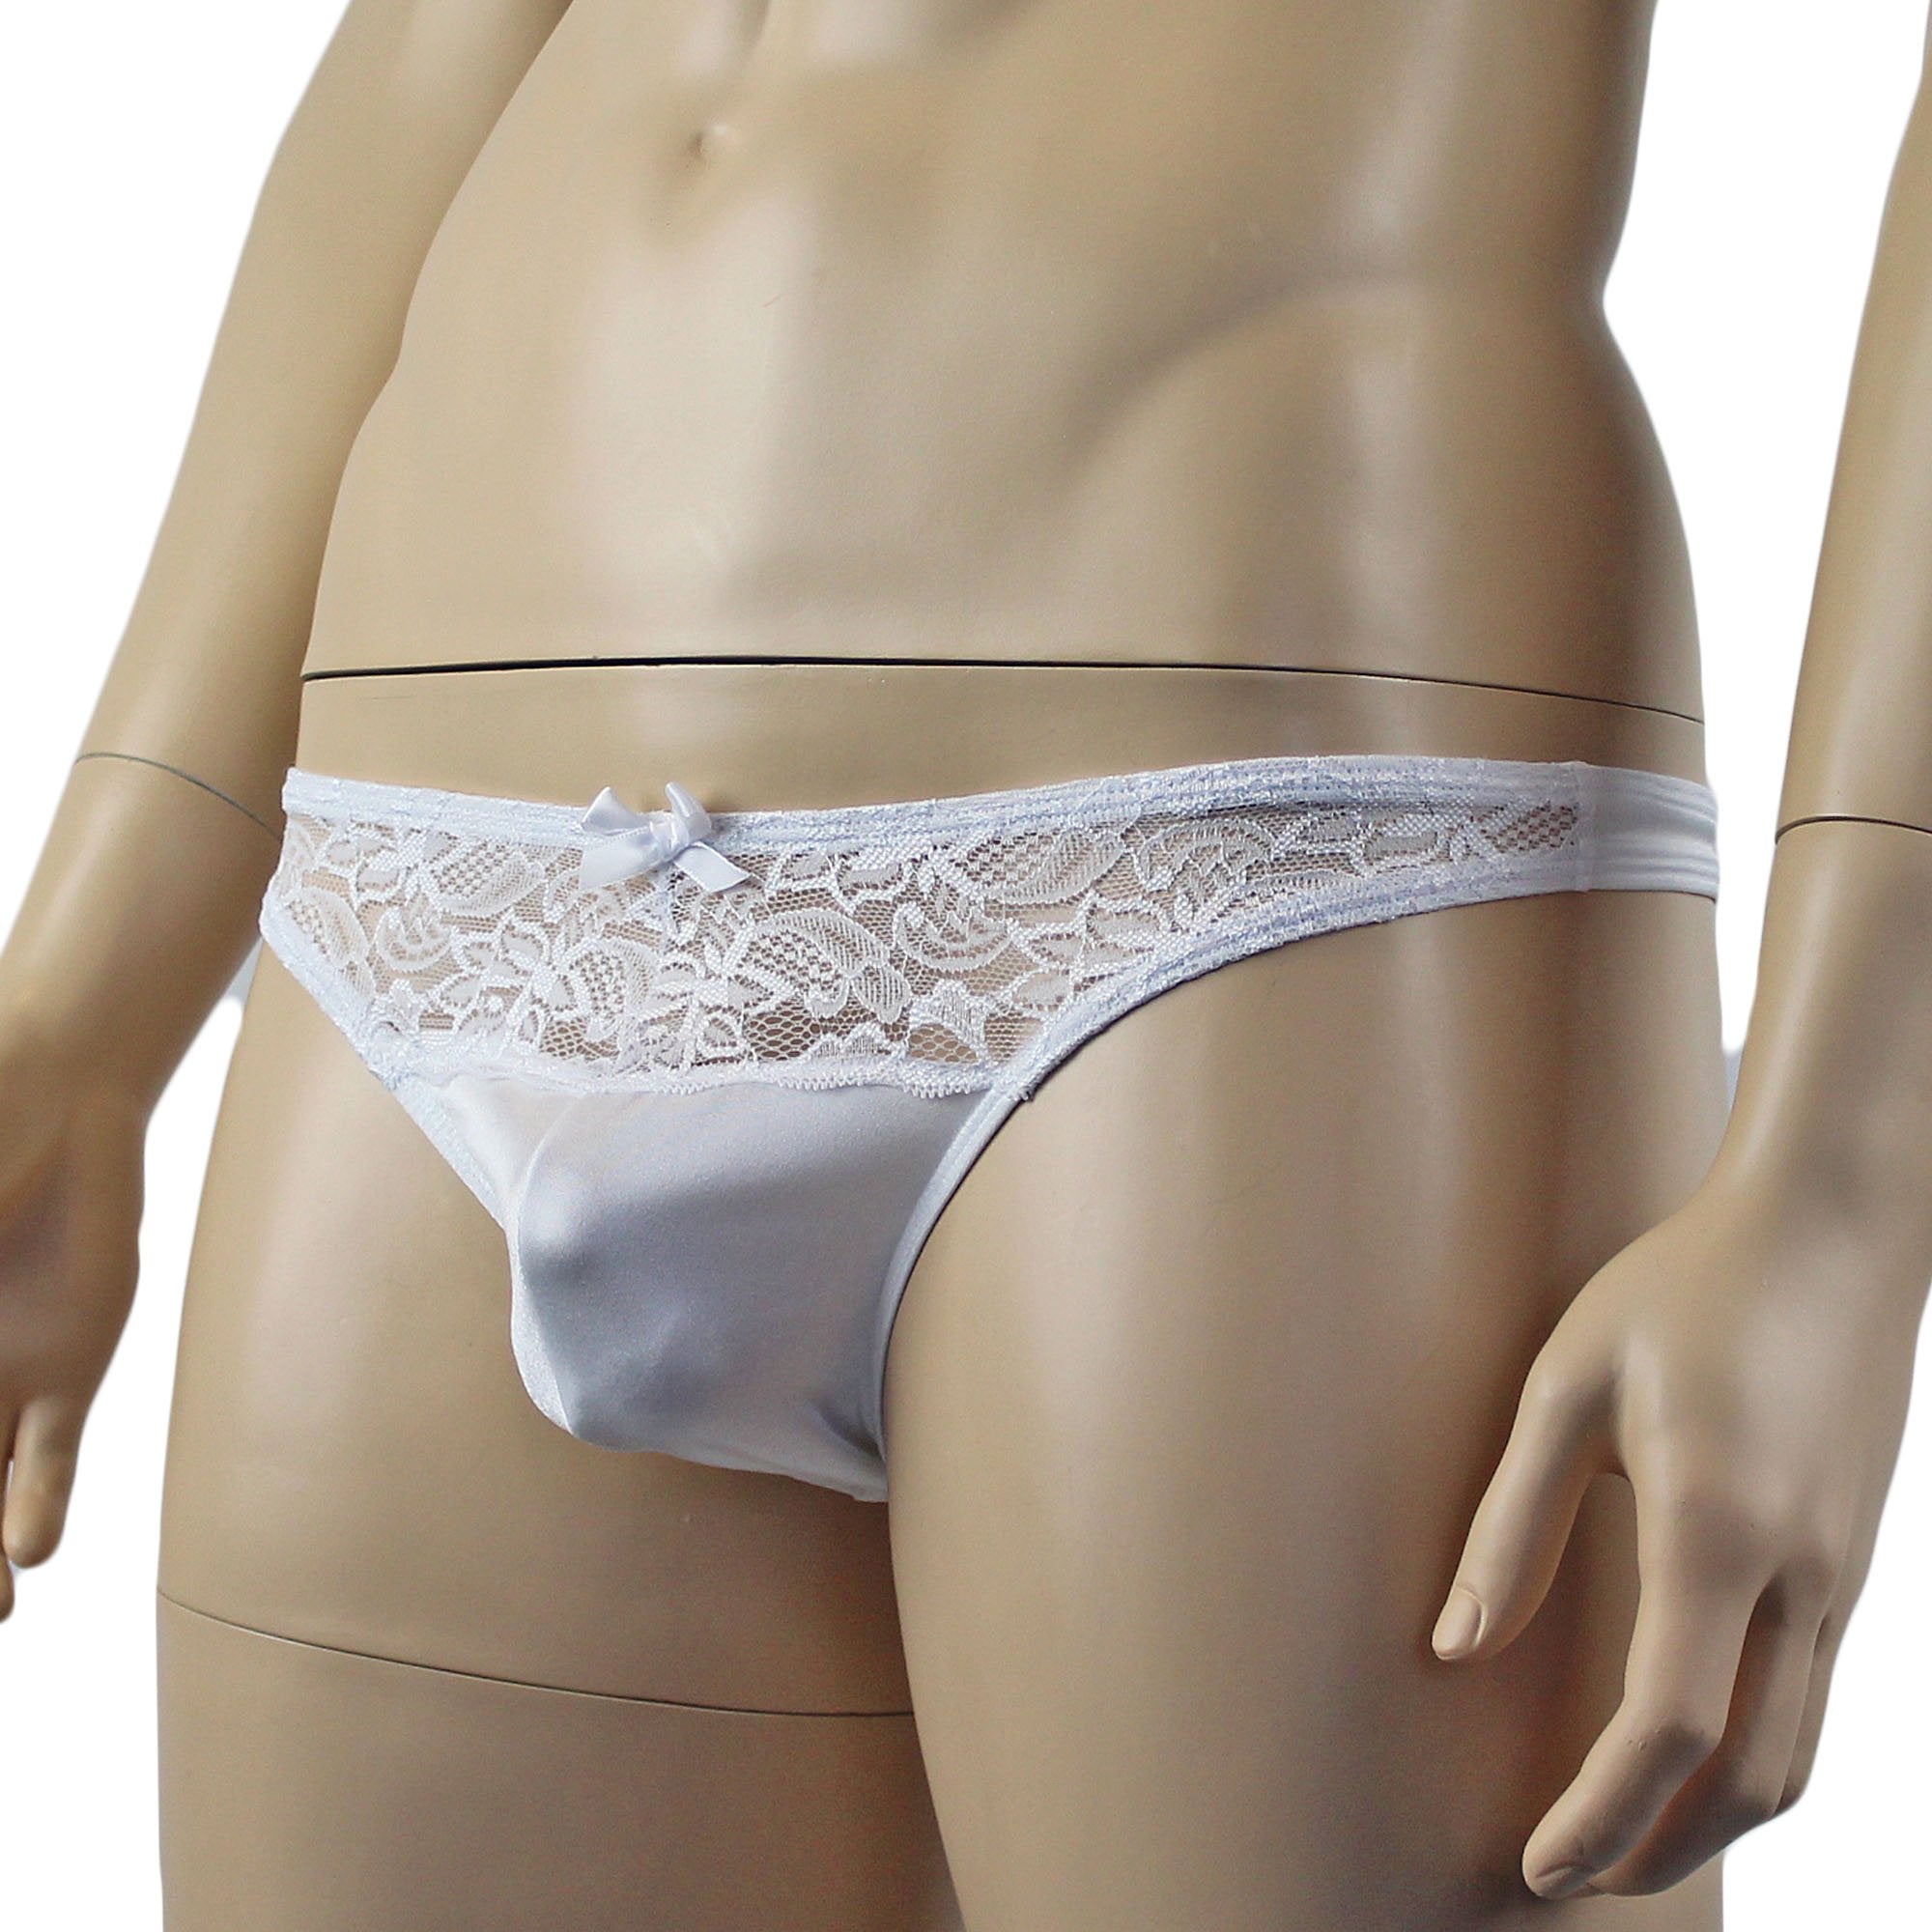 Male Romance Bridal Wedding G string Thong with Clip On Veil Underwear Lingerie White